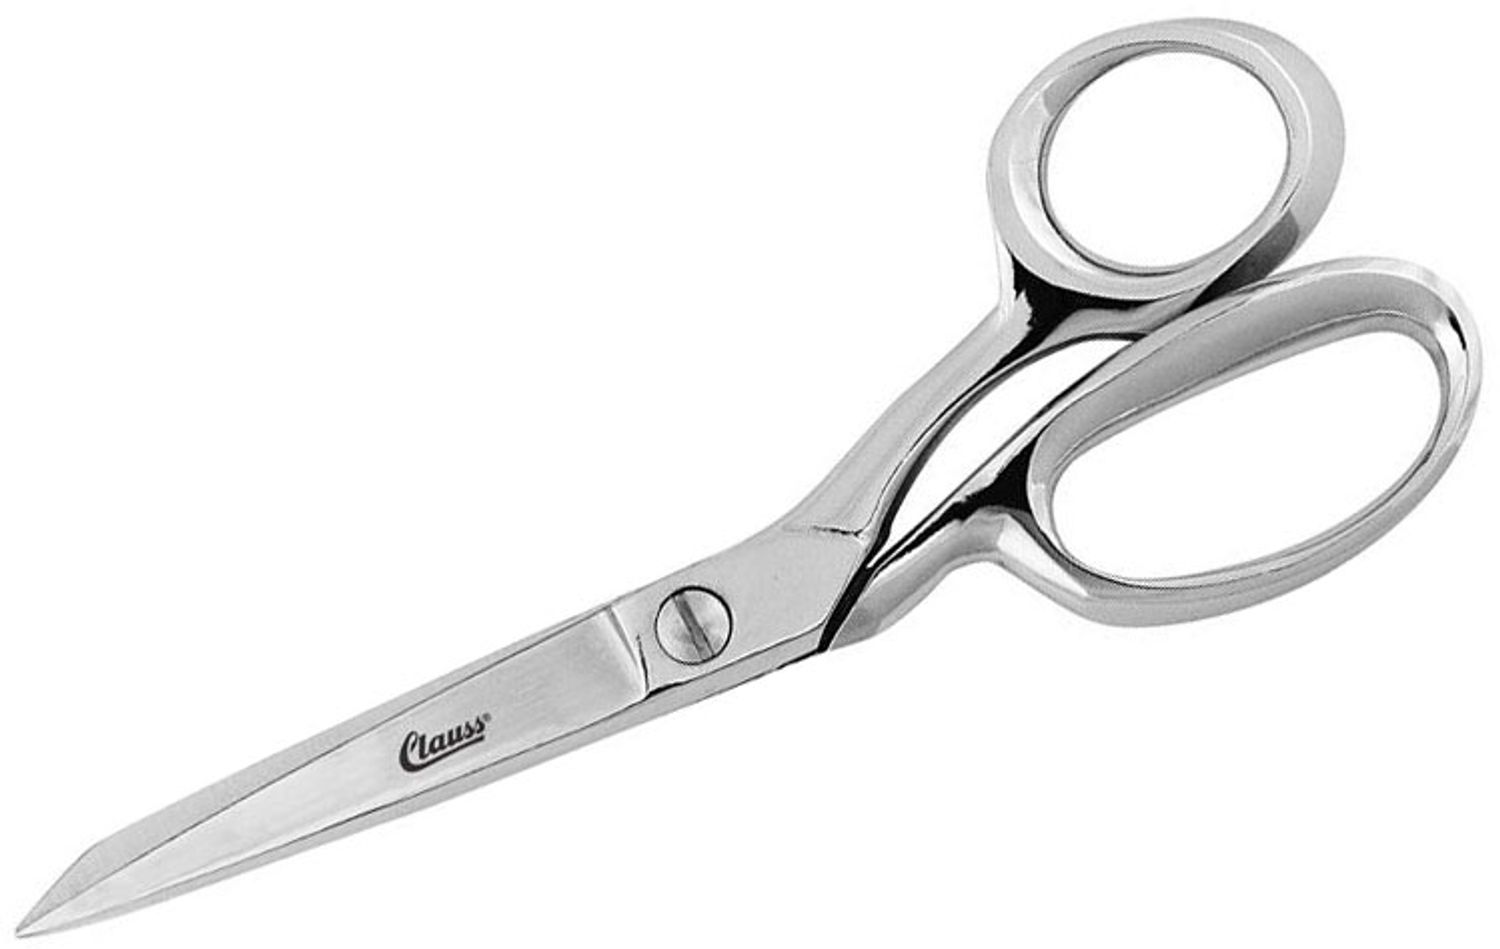 Clauss 10720 Shears,Bent,8 in. L,Hot Forged Steel